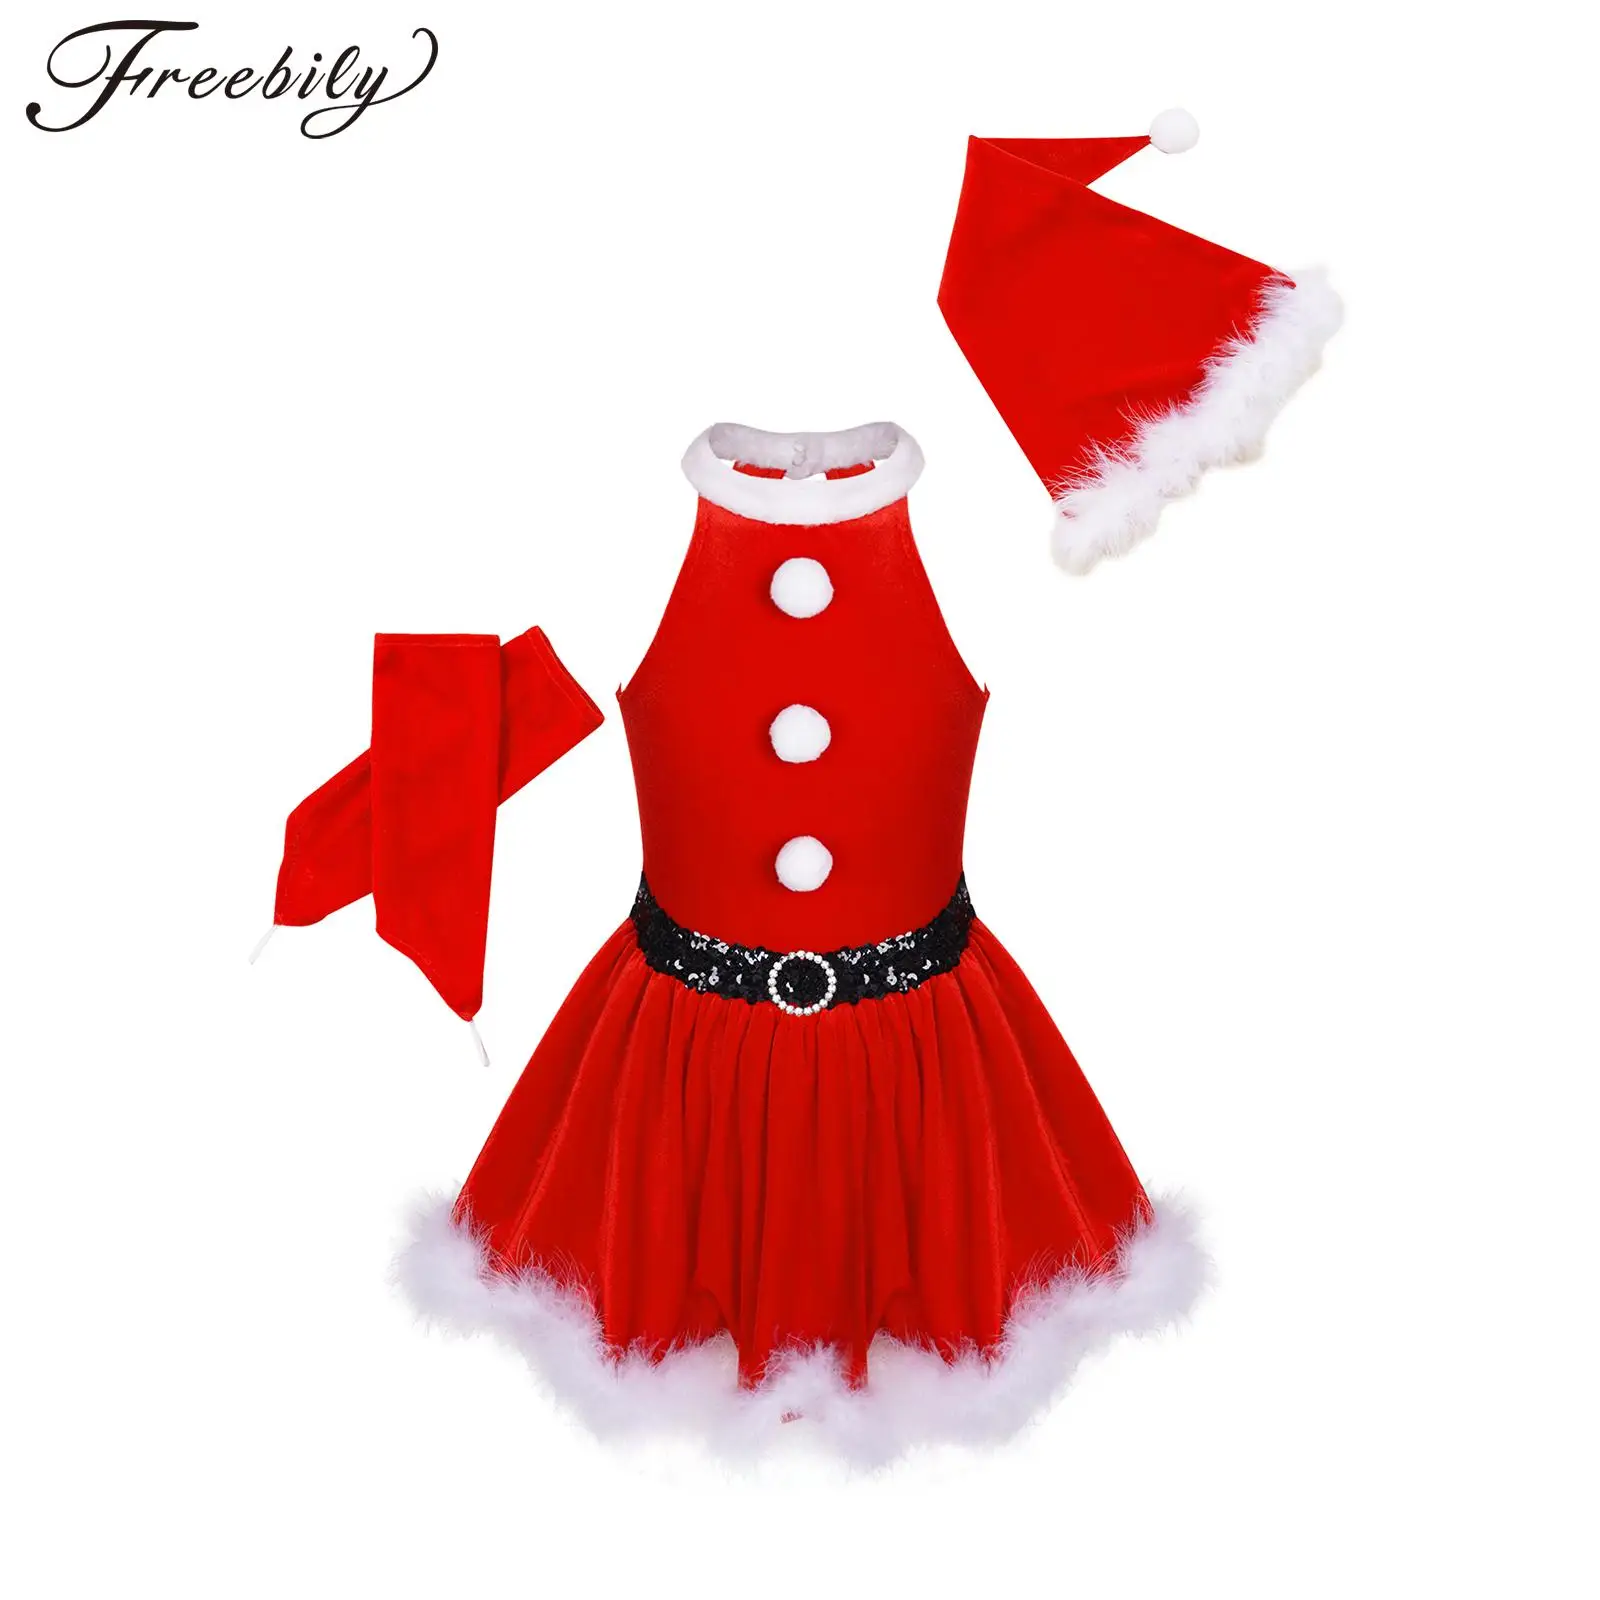 

Kids Girls Christmas Santa Claus Cosplay Costume Ballet Skating Dance Dress with Hat Gloves Xmas New Year Party Stage Show Tutu